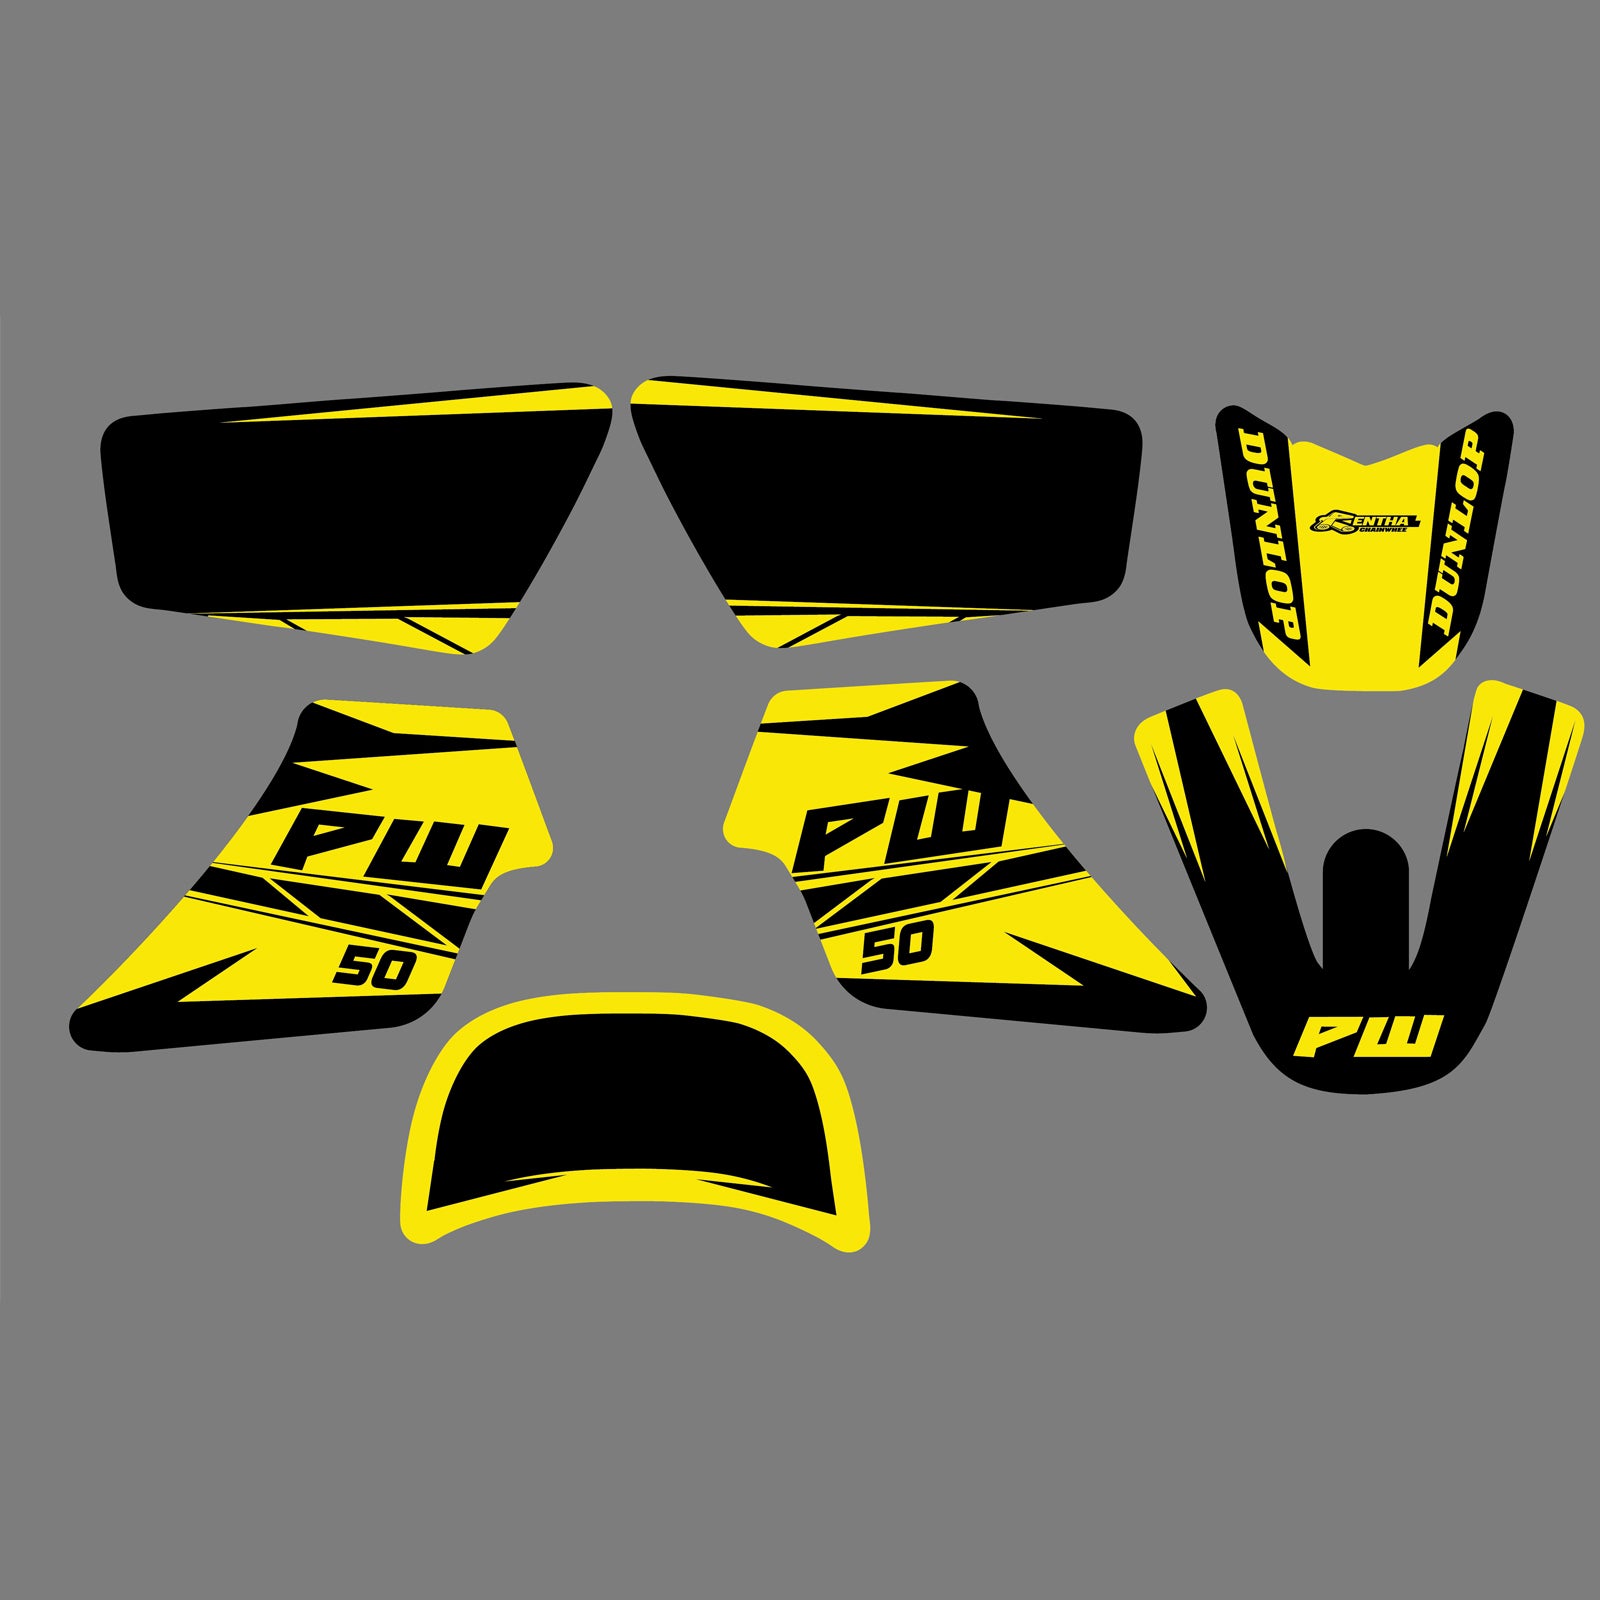 Motorcycle TEAM Personality Decals Stickers Kits For Yamaha PW50 ALL YEARS